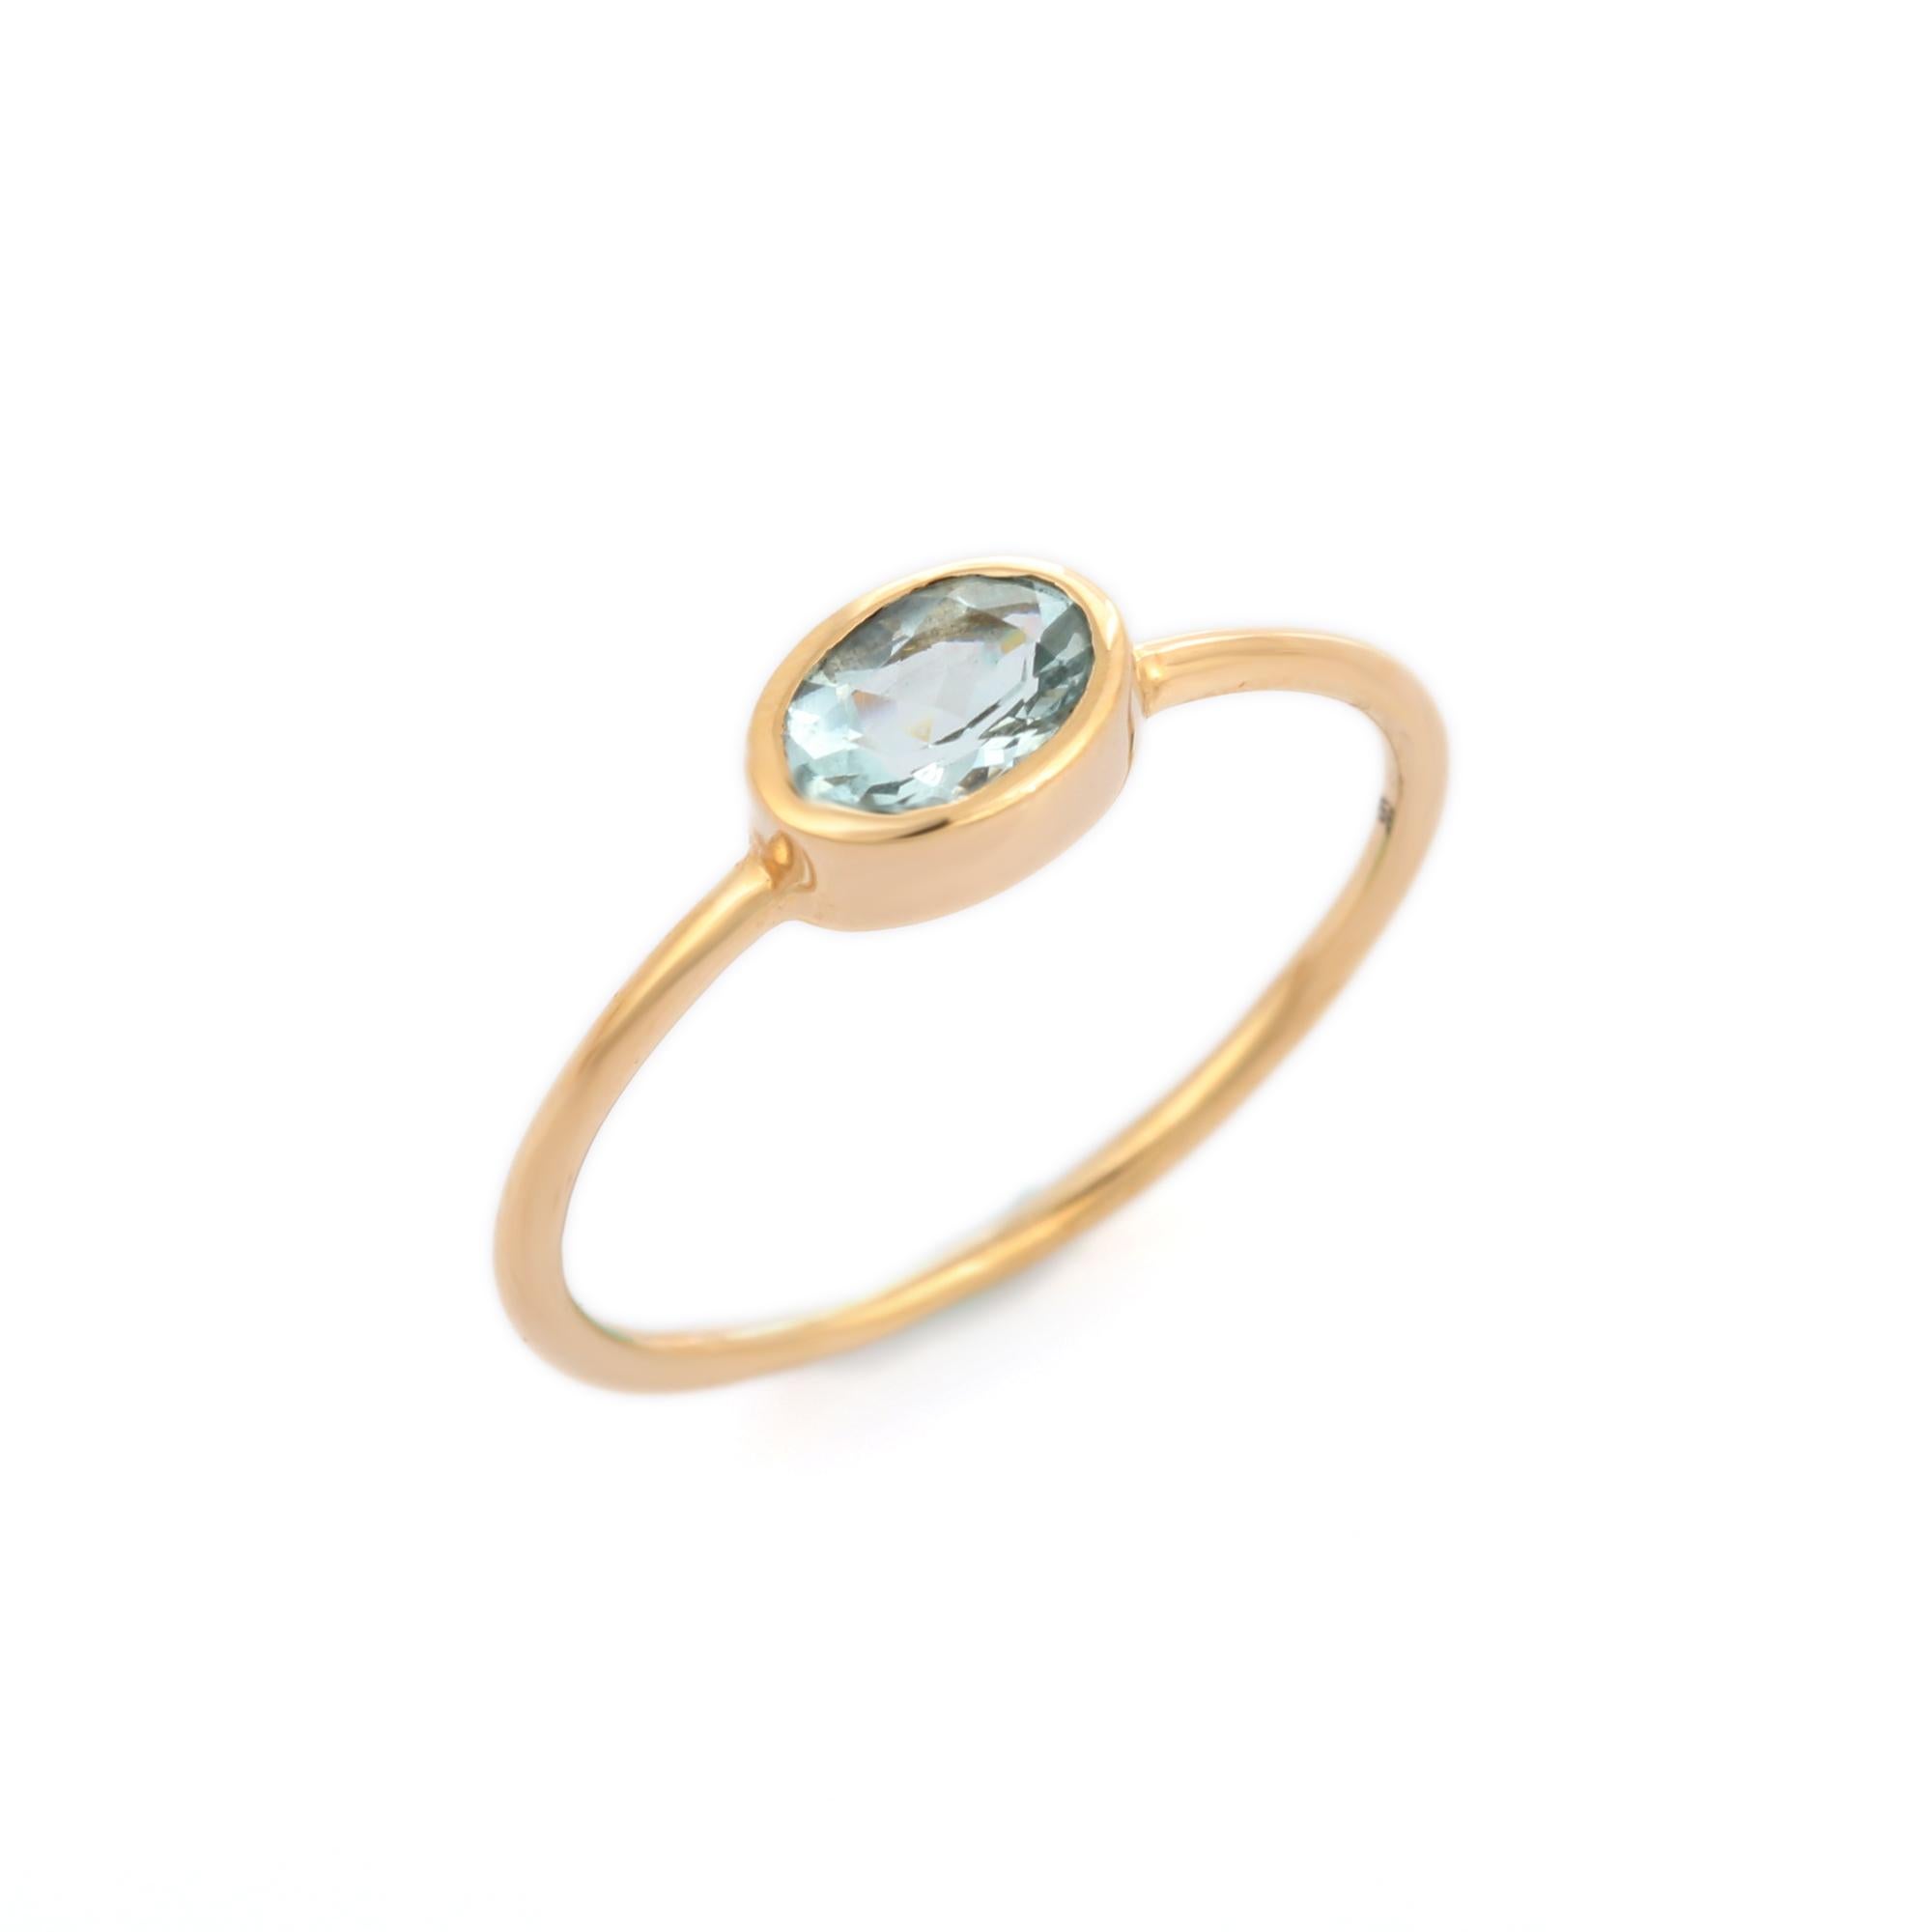 For Sale:  Oval Cut Natural Aquamarine Solitaire Ring in 14K Yellow Gold 9